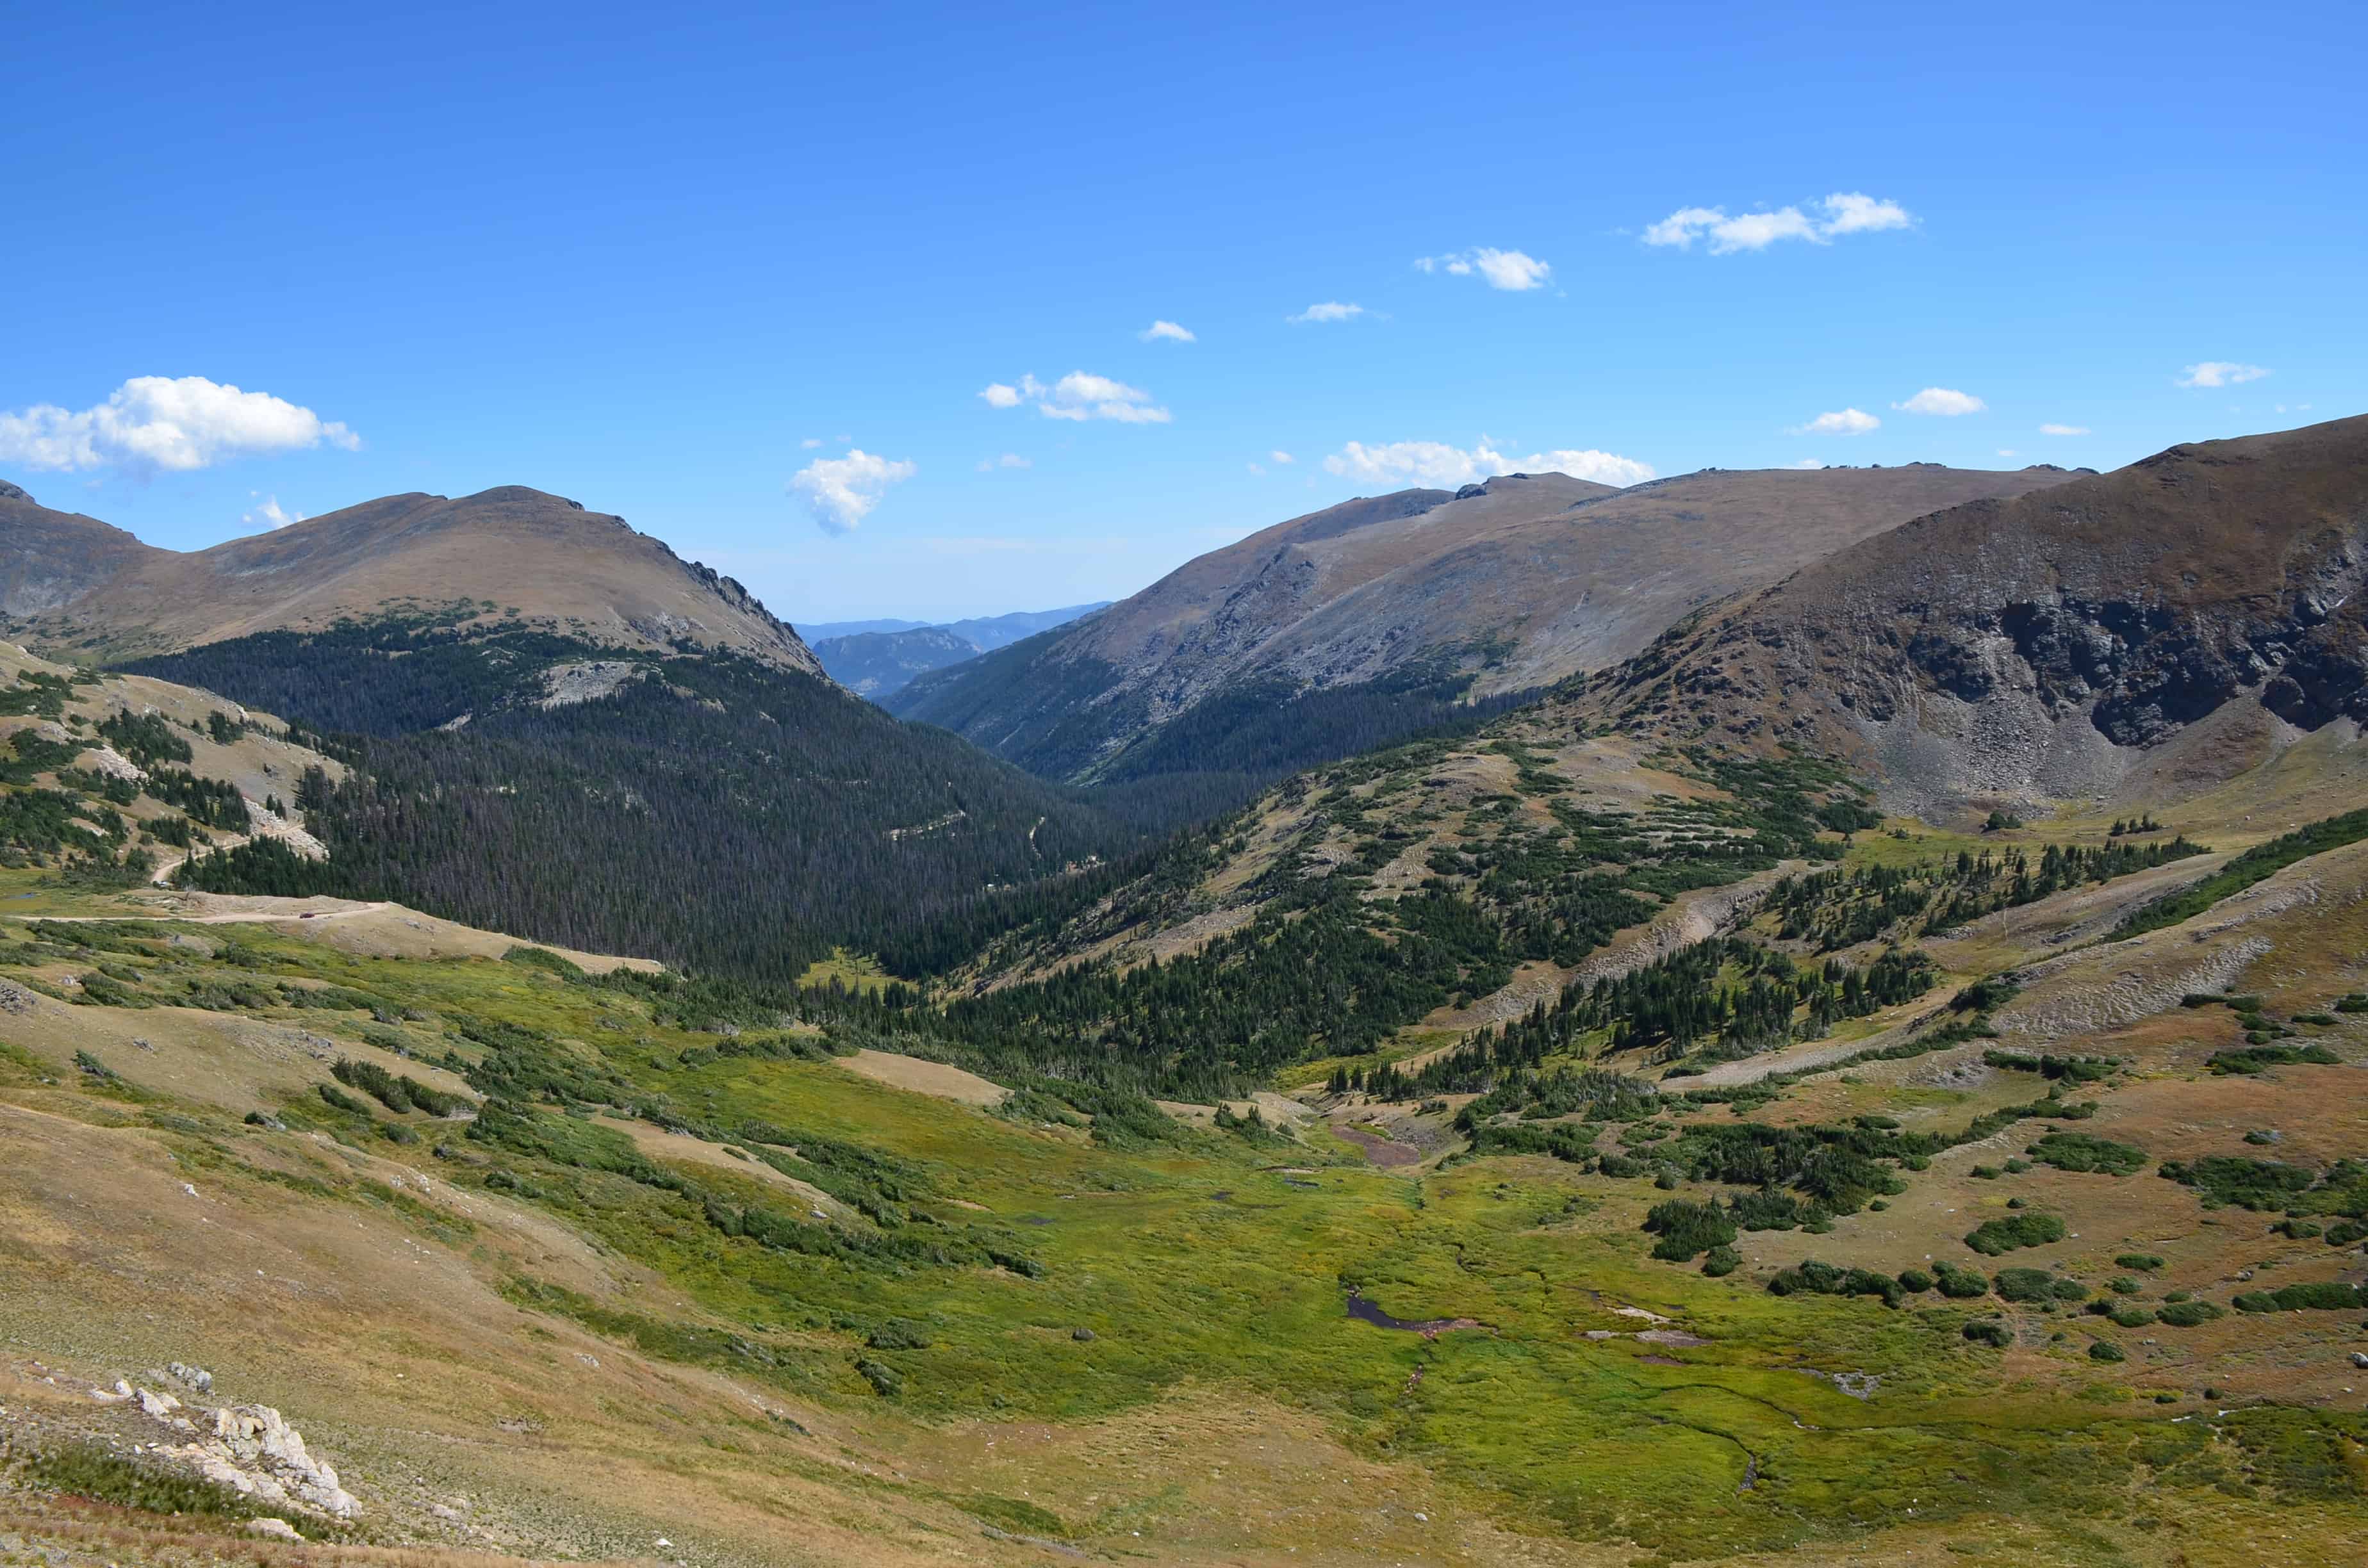 View from Alpine Visitor Center on Trail Ridge Road in Rocky Mountain National Park, Colorado